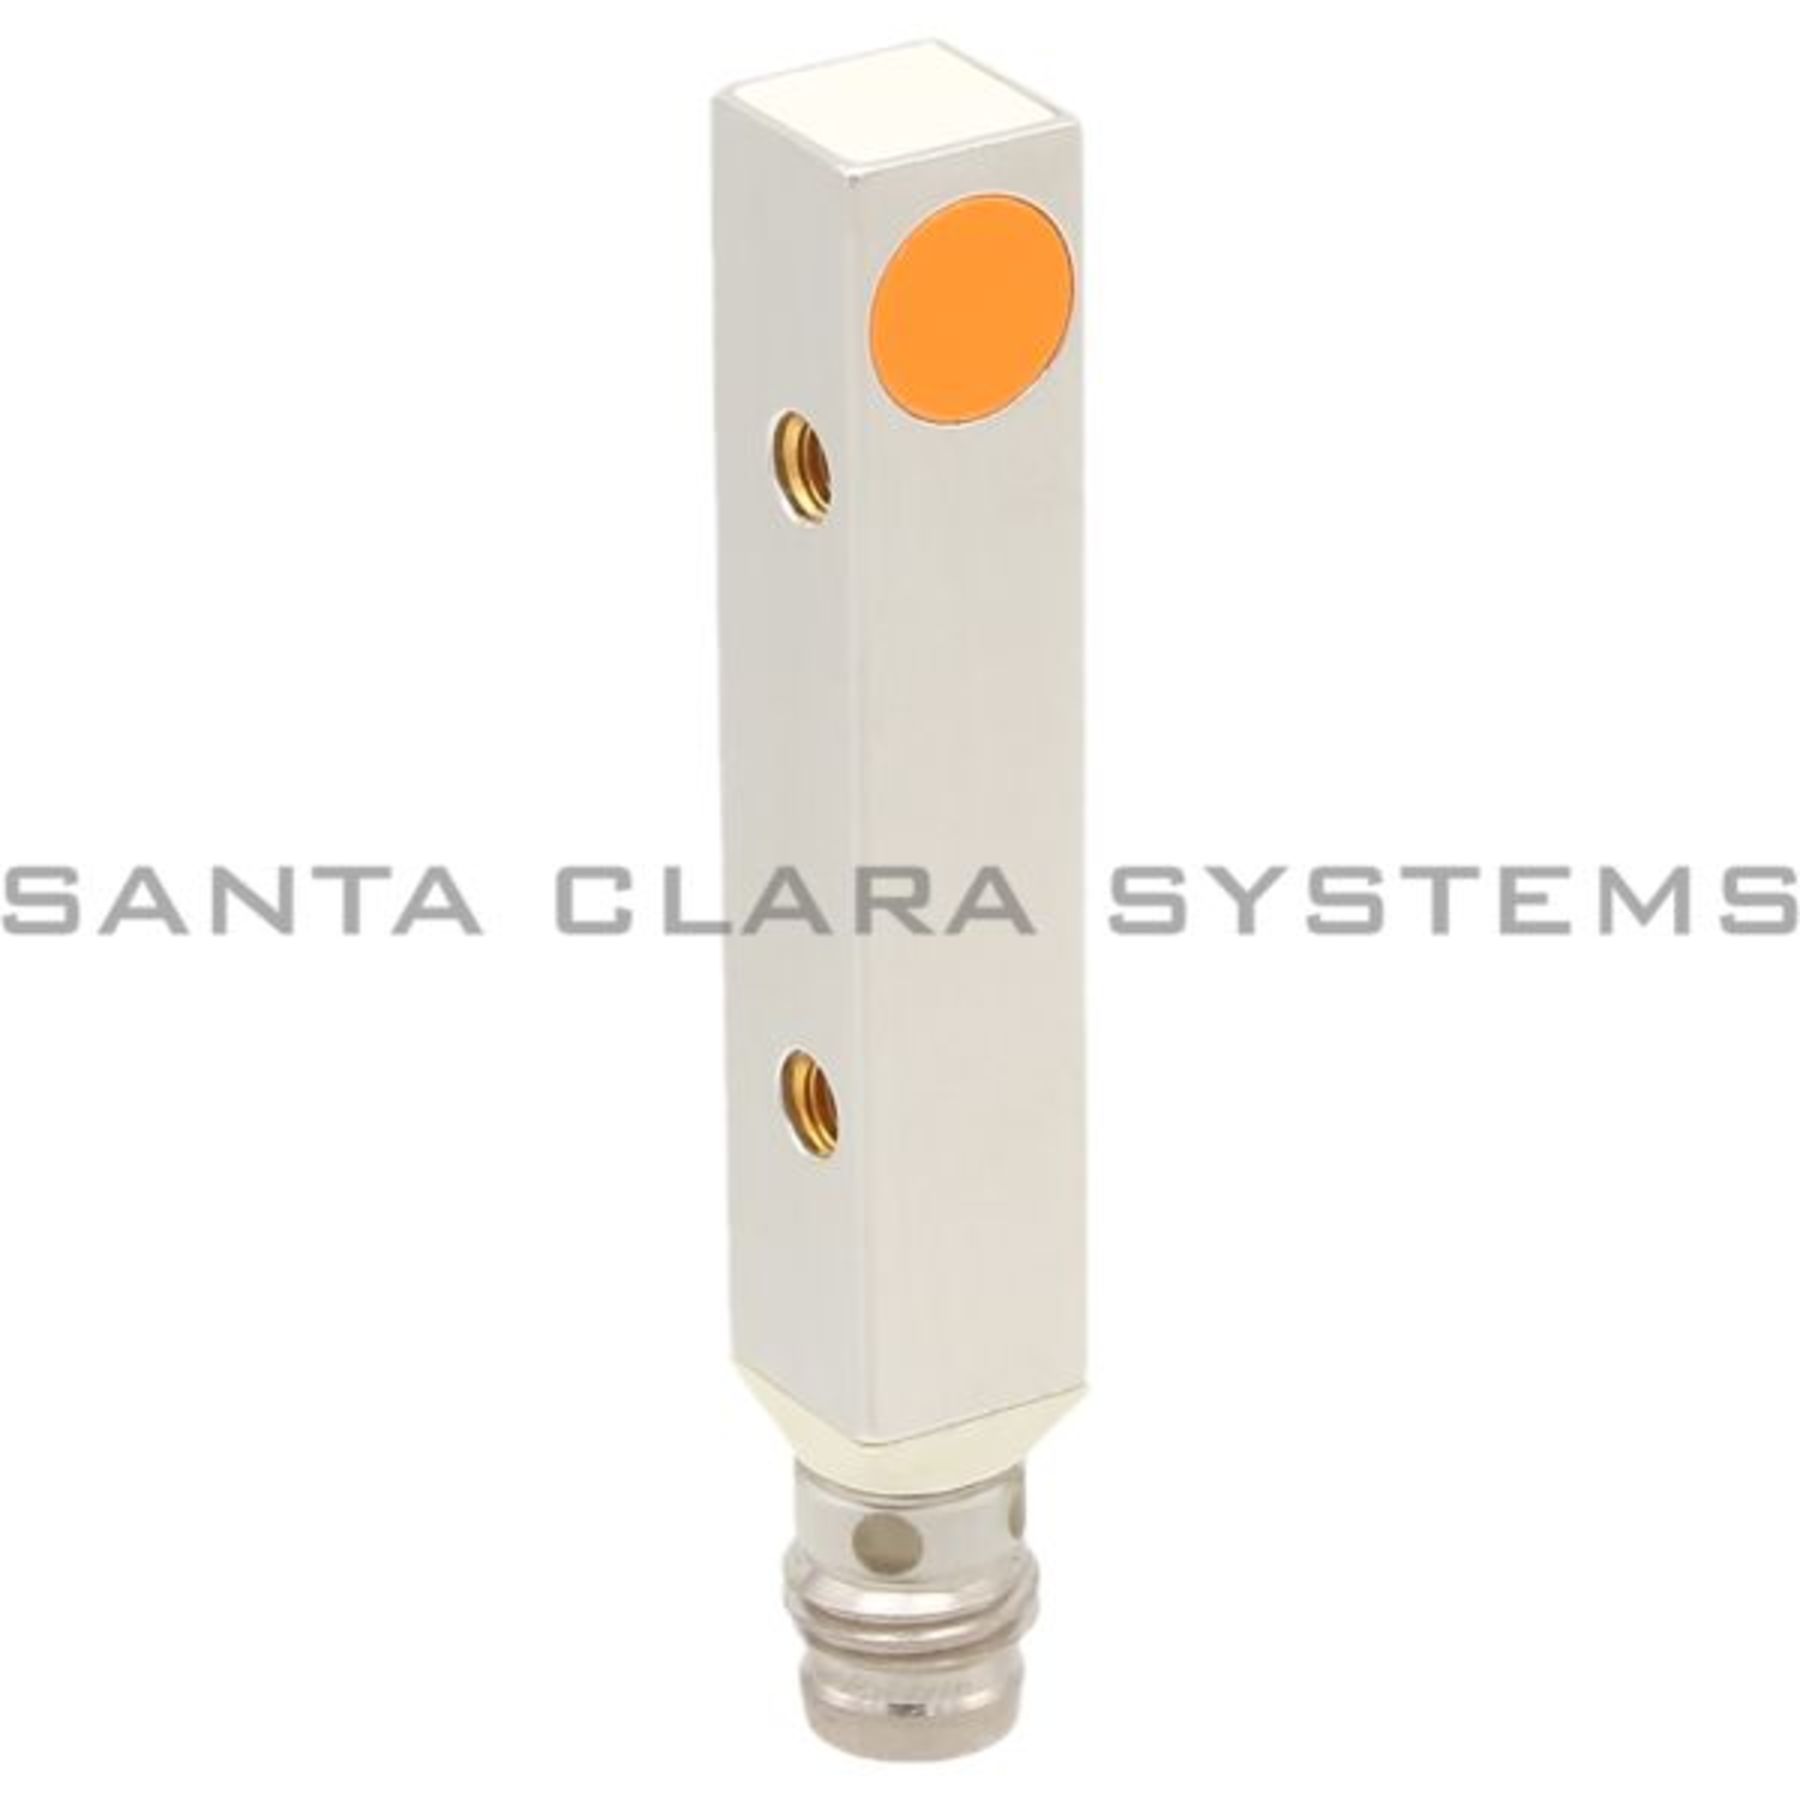 IL5004 Efector In stock and ready to ship - Santa Clara Systems